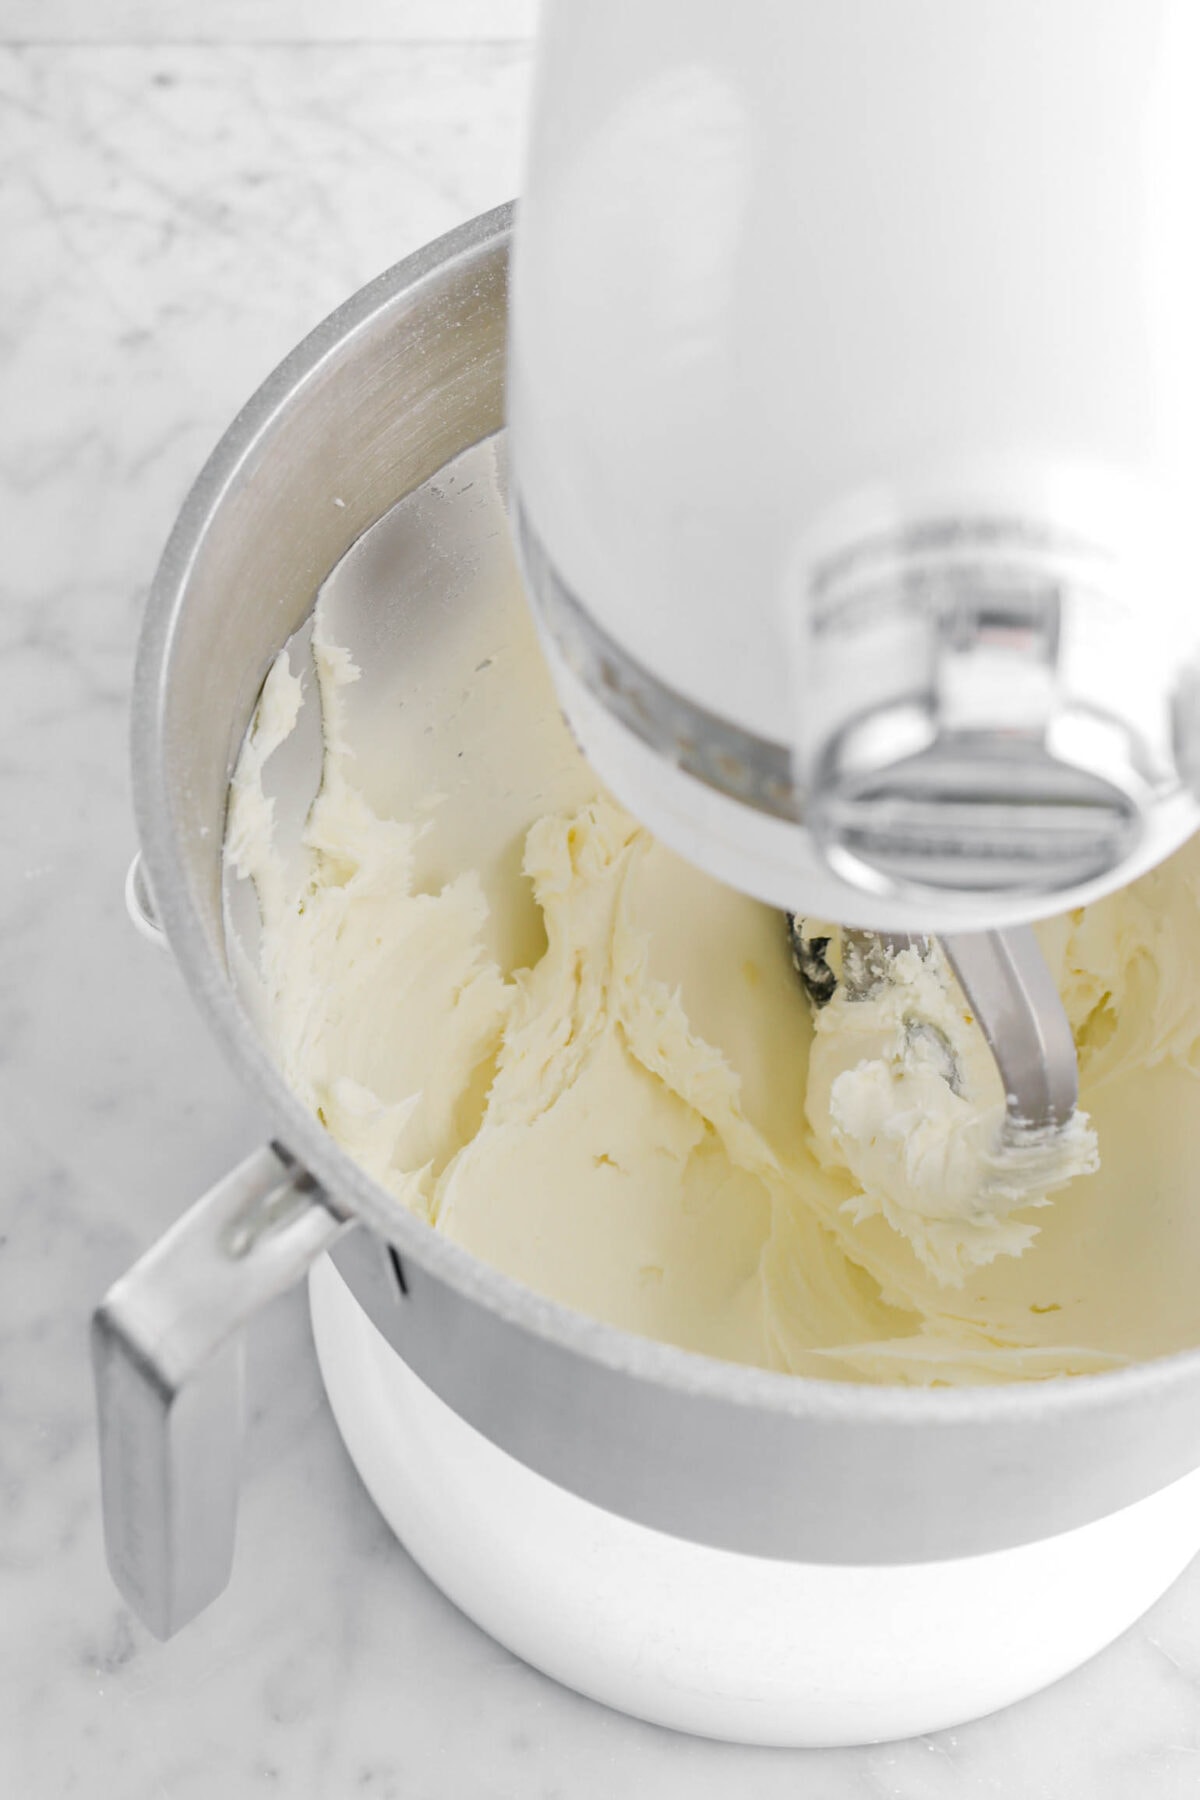 butter and powdered sugar mixture in stand mixer.